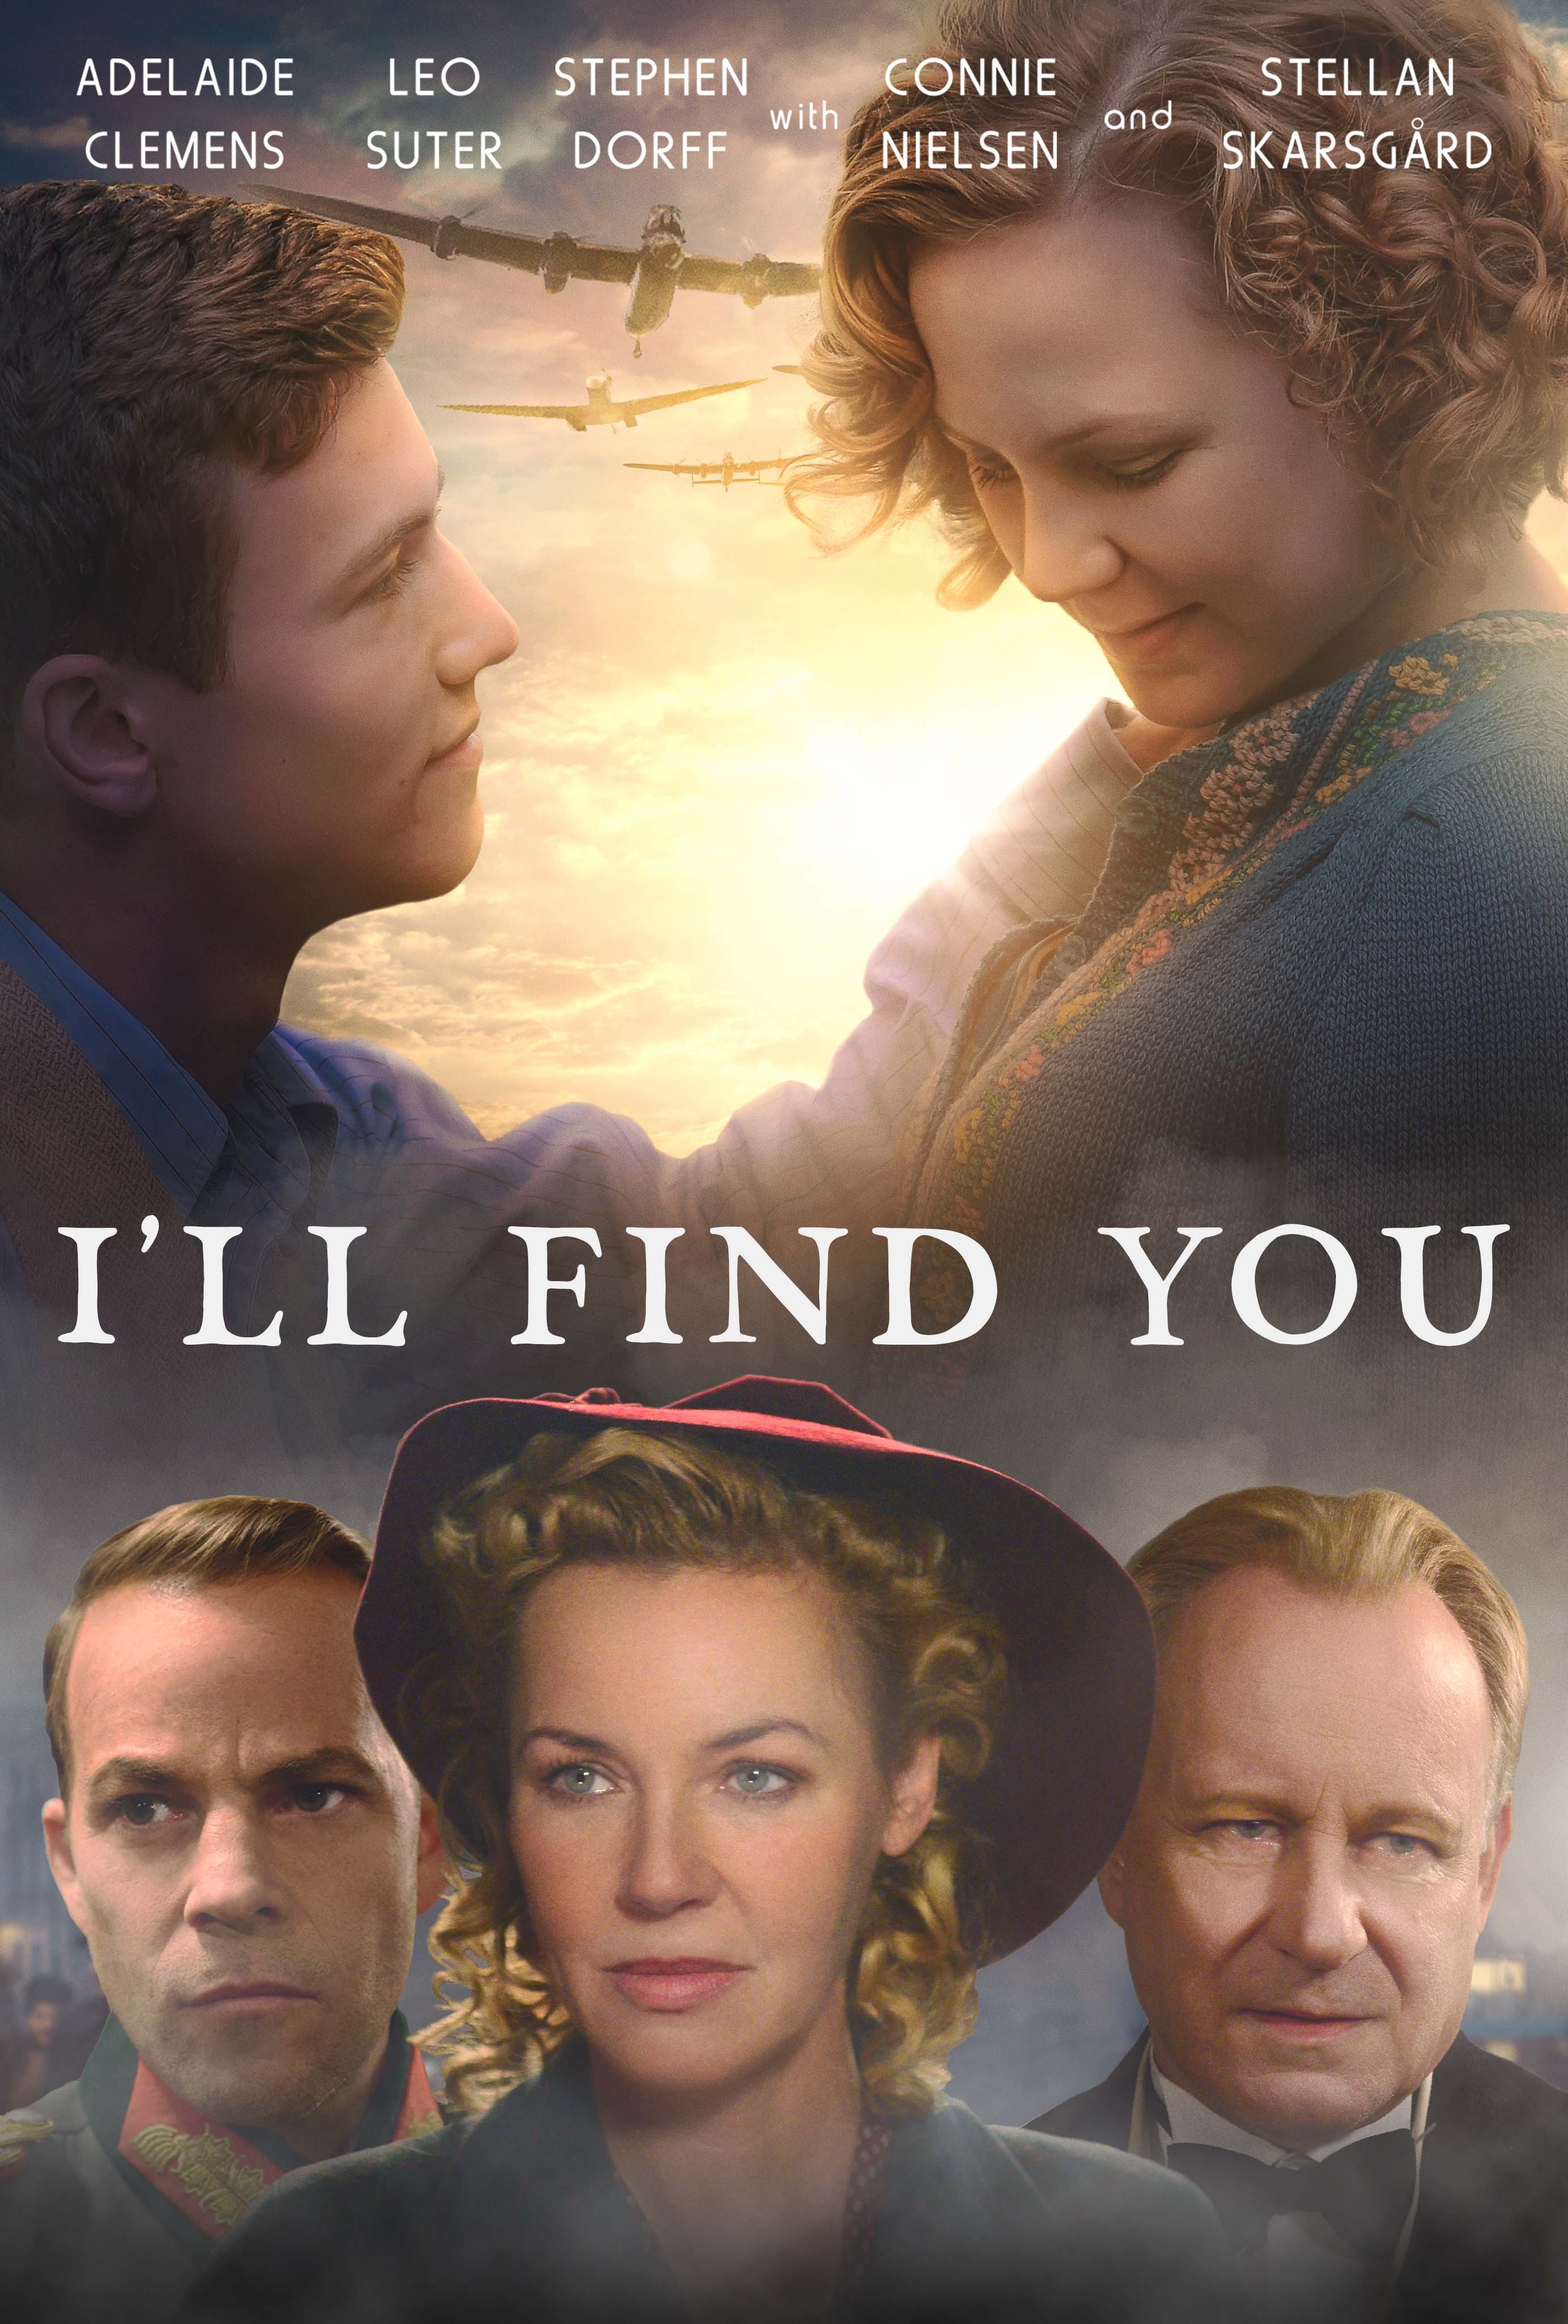 i'll find you movie review